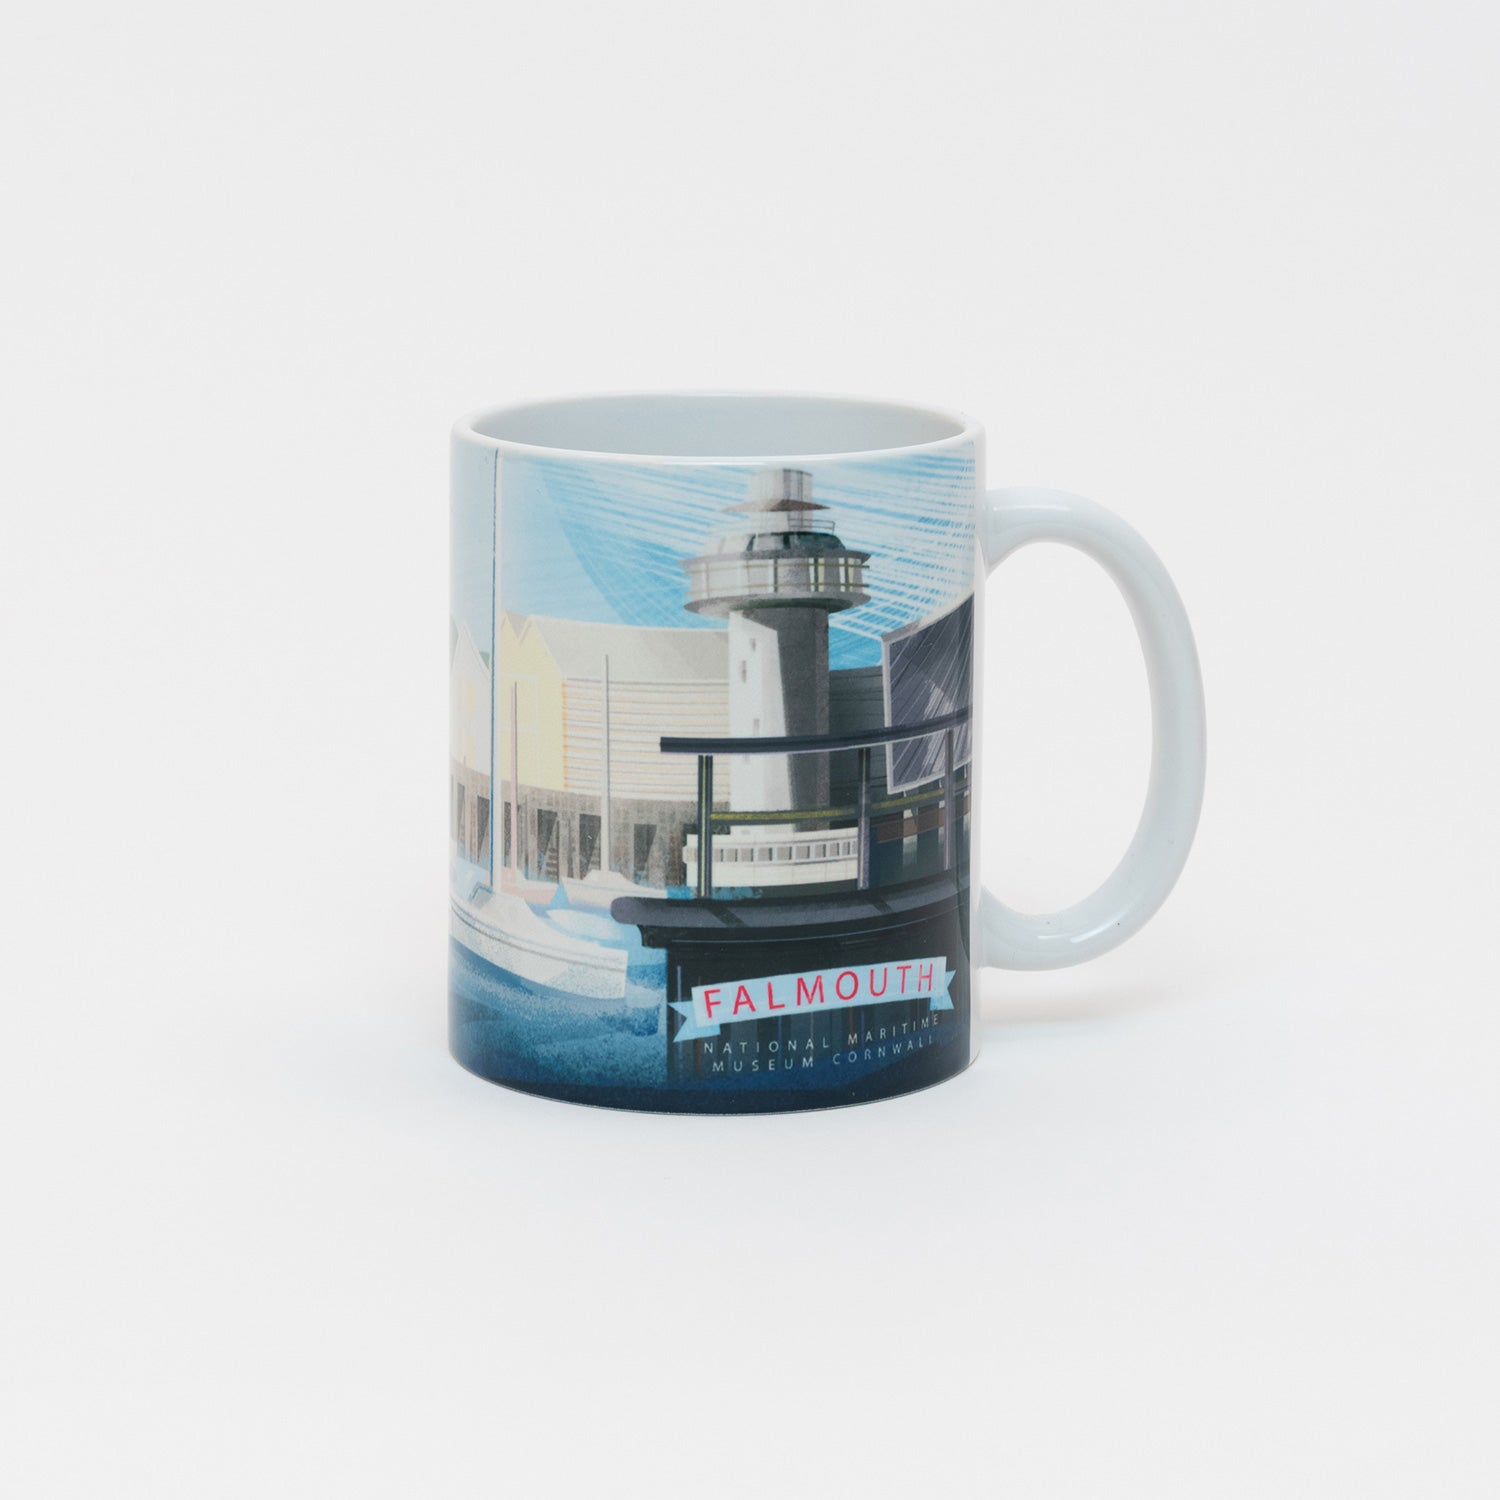 The front view of the white mug with an illustration of National Maritime Museum Cornwall